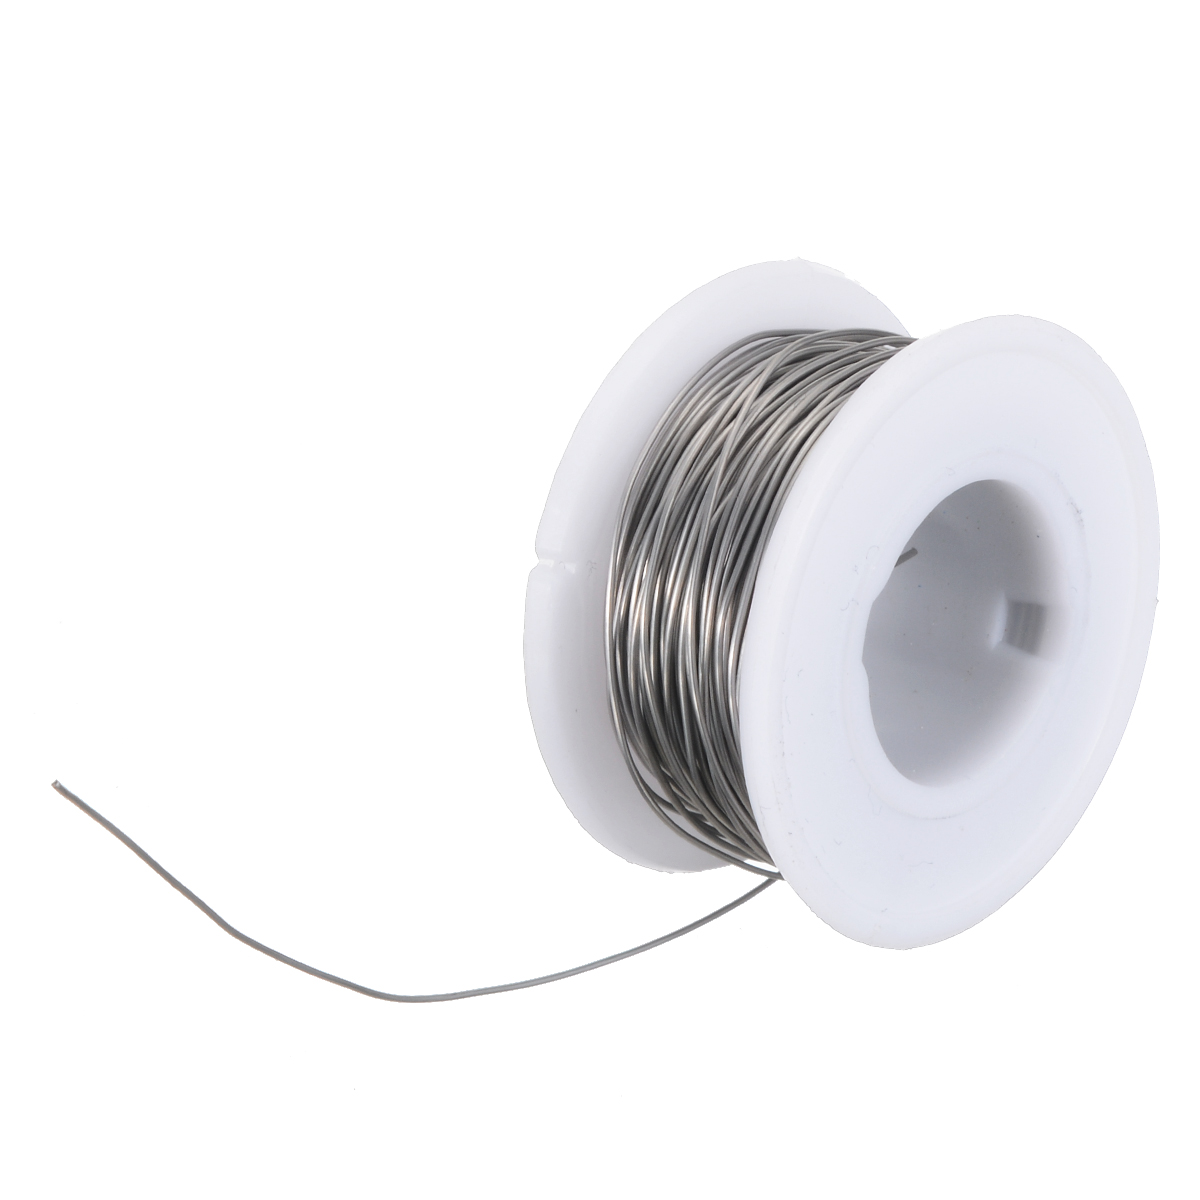 High Resistivity 10m 0.5mm Electric Resistance Wire Heating Wire For Hot Wire Foam Cutter Heating Cutting Machine